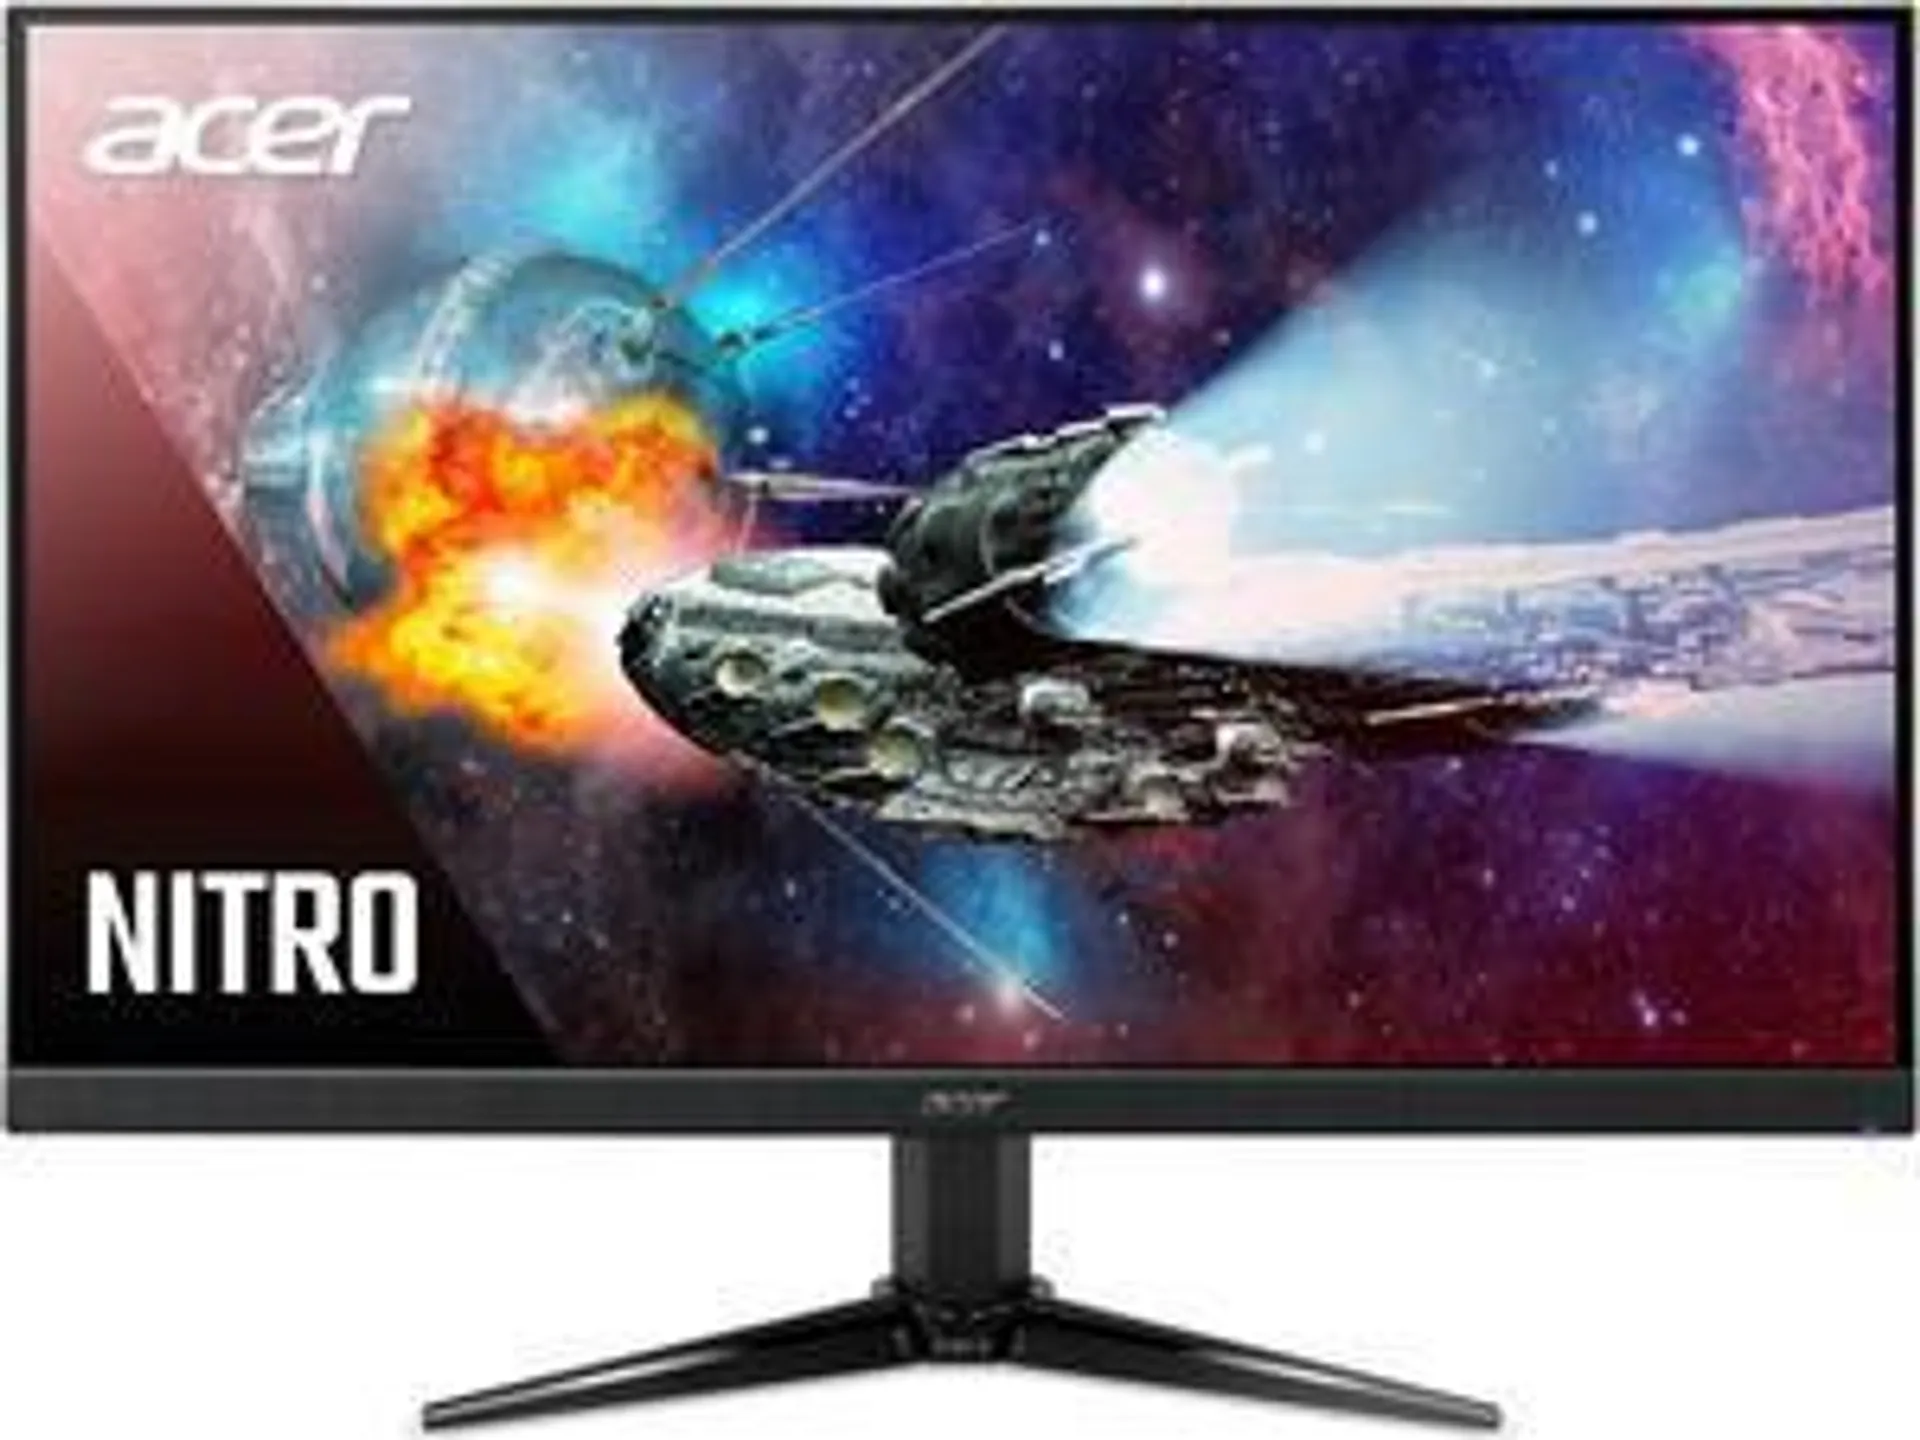 Acer Nitro QG241Y S3 23.8inch 1920x1080 180Hz Refresh rate 1ms response time AMD FreeSync Premium HDR Gaming Monitor, HDMIx2, DisplayPort, Speaker